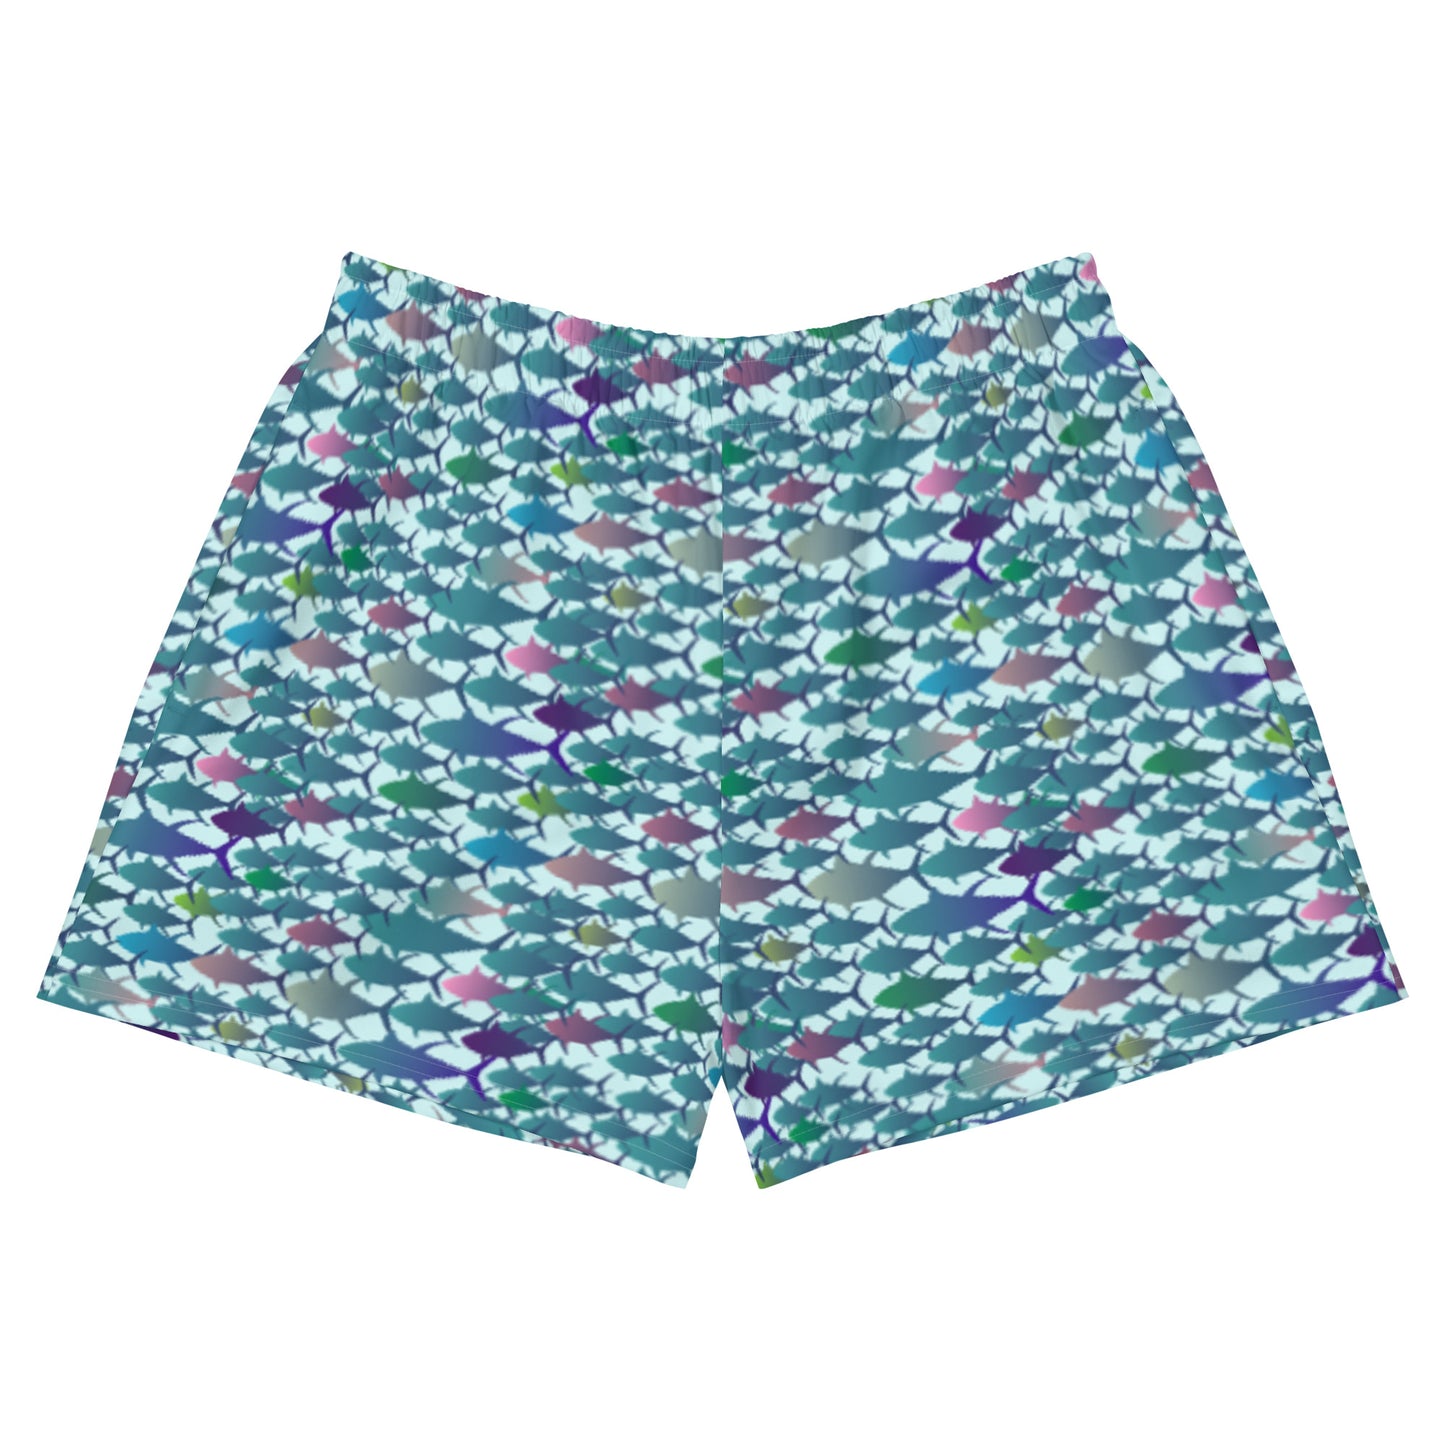 Technicolor tuna Women’s Recycled Athletic Shorts